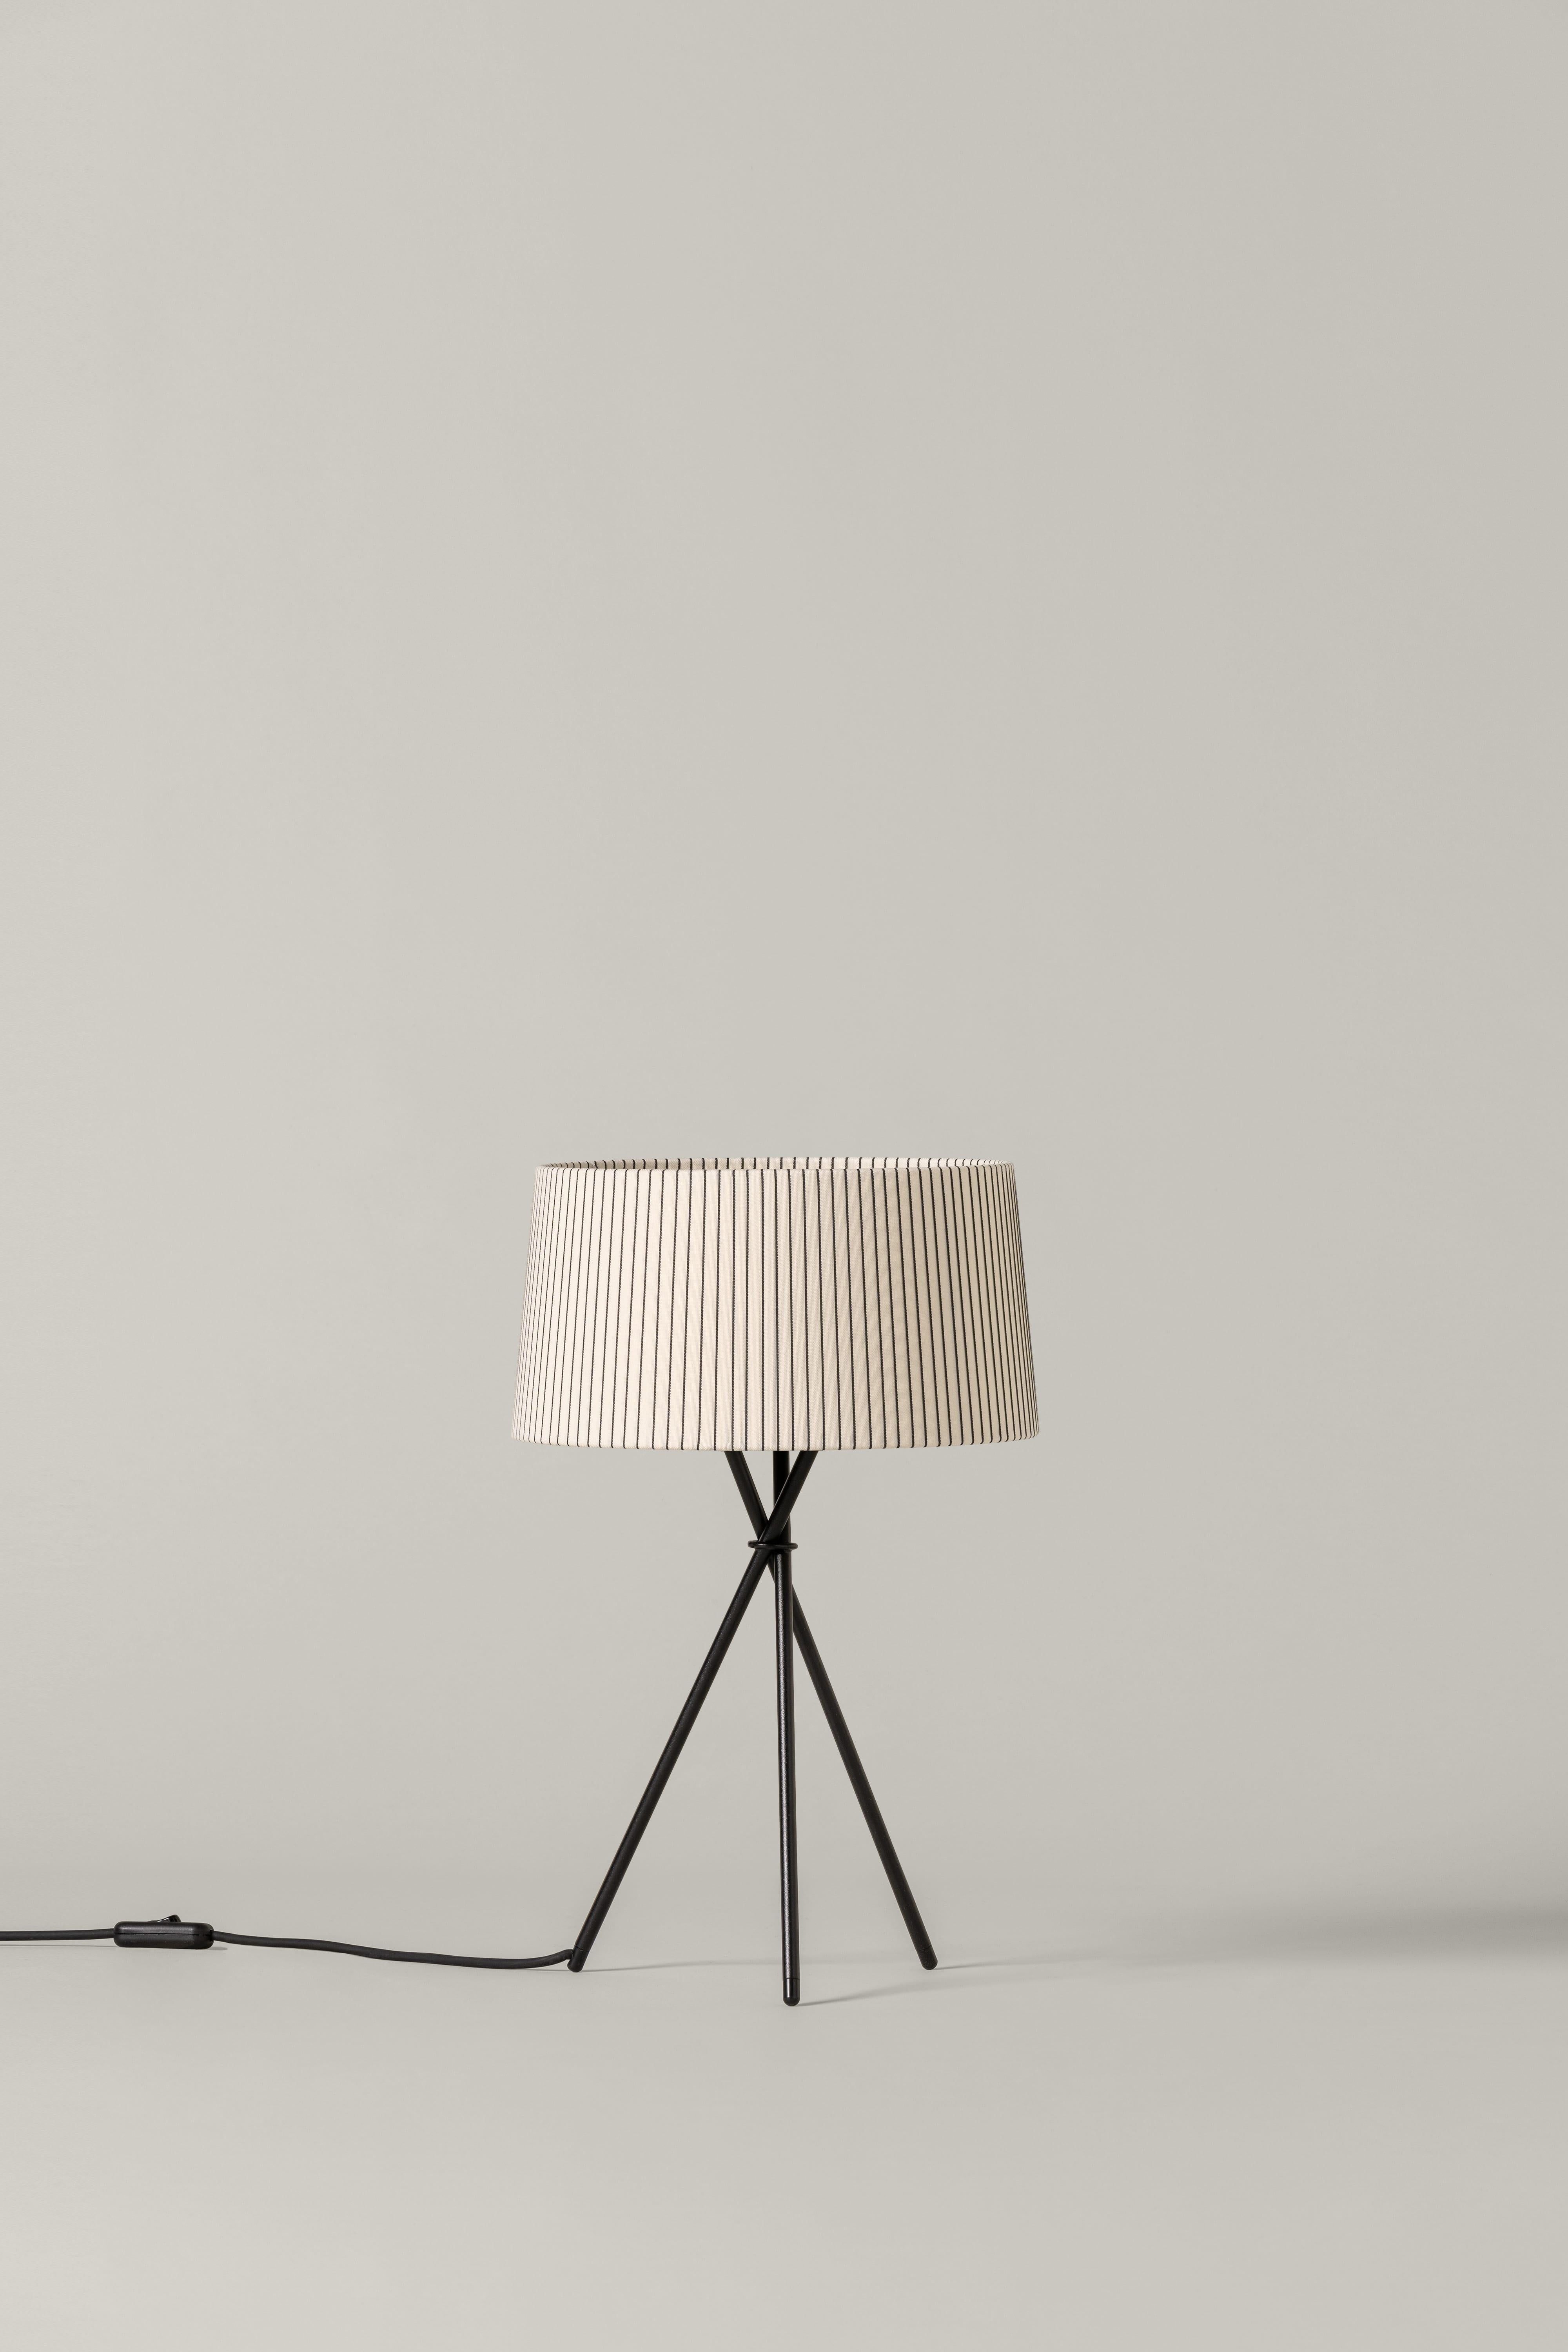 Diplomática trípode M3 table lamp by Santa & Cole
Dimensions: D 31 x H 50 cm
Materials: Metal, diplomática stripe ribbon lampshade.
Available in other colors finishes.

Trípode humanises neutral spaces with its colourful and functional